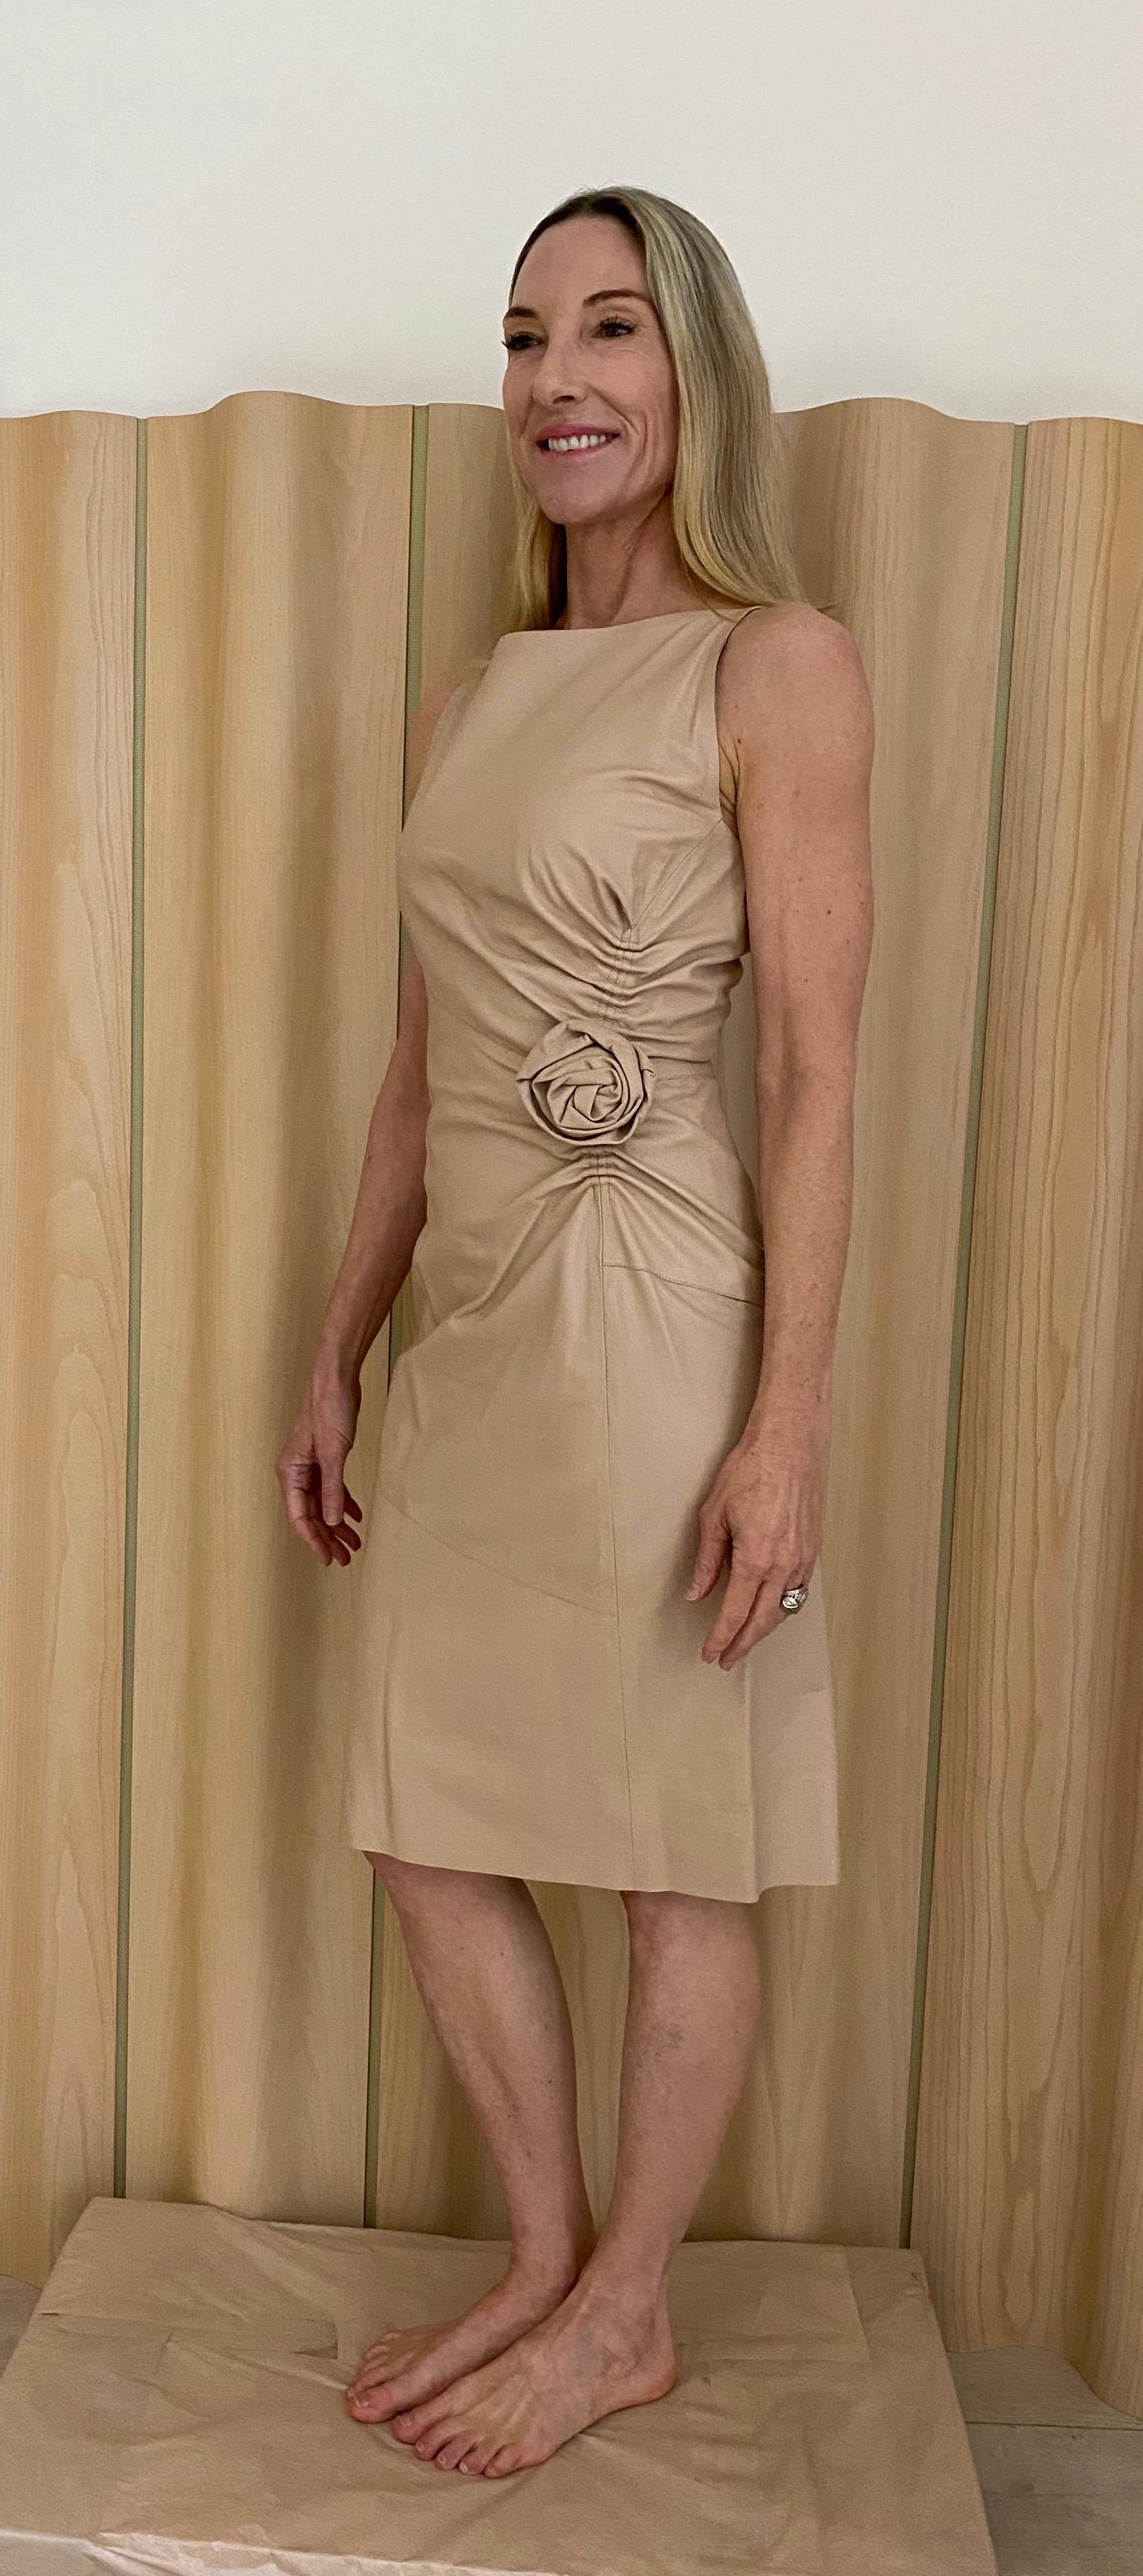 Gucci by Tom Ford light blush color soft leather dress with rosette.  Very flattering and chic.
Fit size US 4